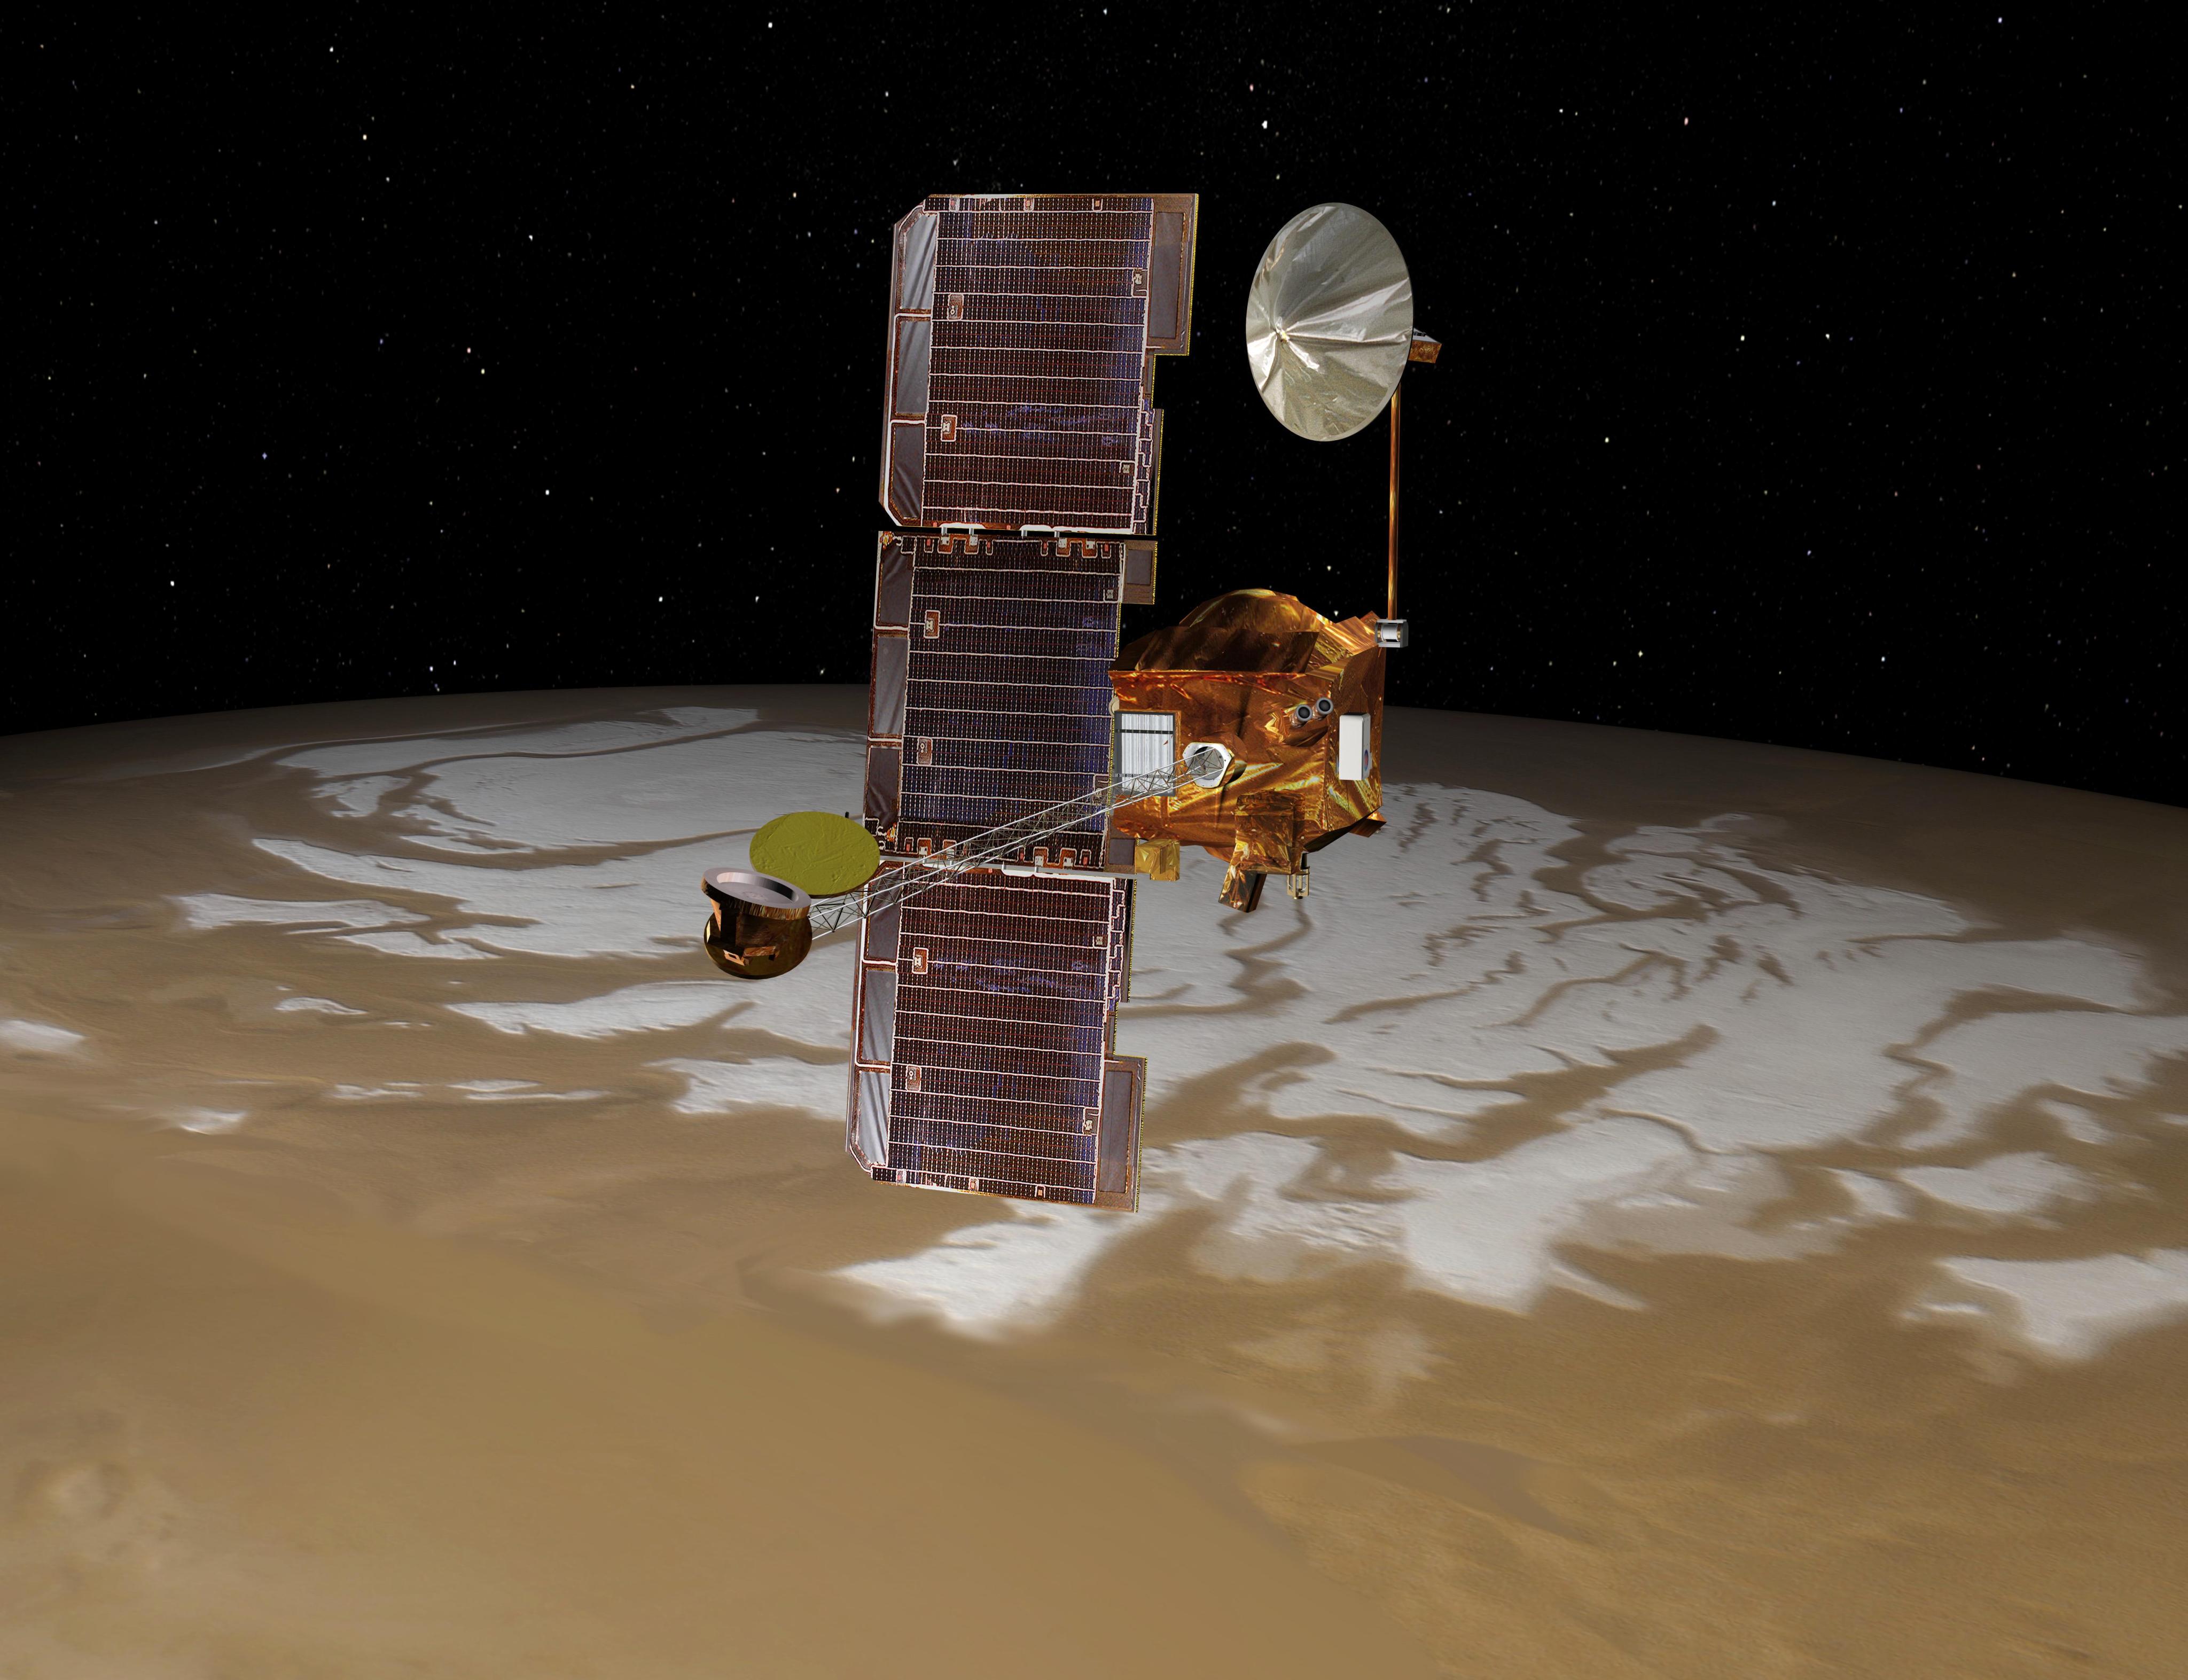 A gold-colored spacecraft orbits over Mars, with a dish antenna extending from its top, a spindly boom extending from the front of it toward the viewer, and a large three-paneled solar array attached vertically to its left side. Mars appears as a dusty tan color covering the lower half of the frame, with patches of white at its top, against a black sky flecked with stars in the upper frame.